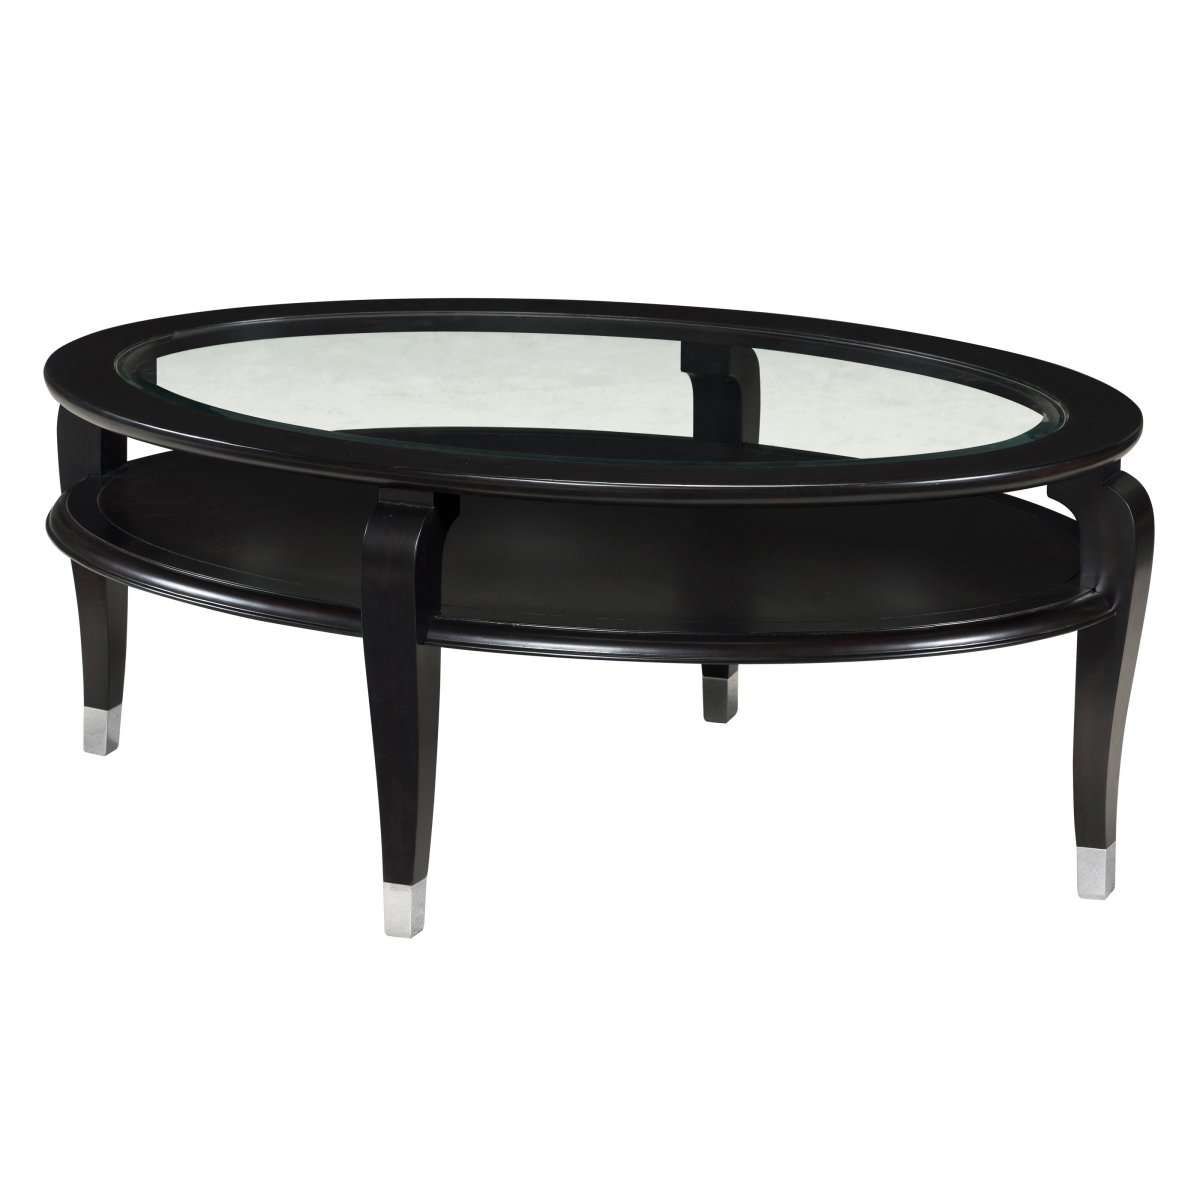 Coffee Tables Ideas: Top Black Oval Coffee Table Set Round Or Oval Regarding Widely Used Coffee Tables With Oval Shape (View 12 of 20)